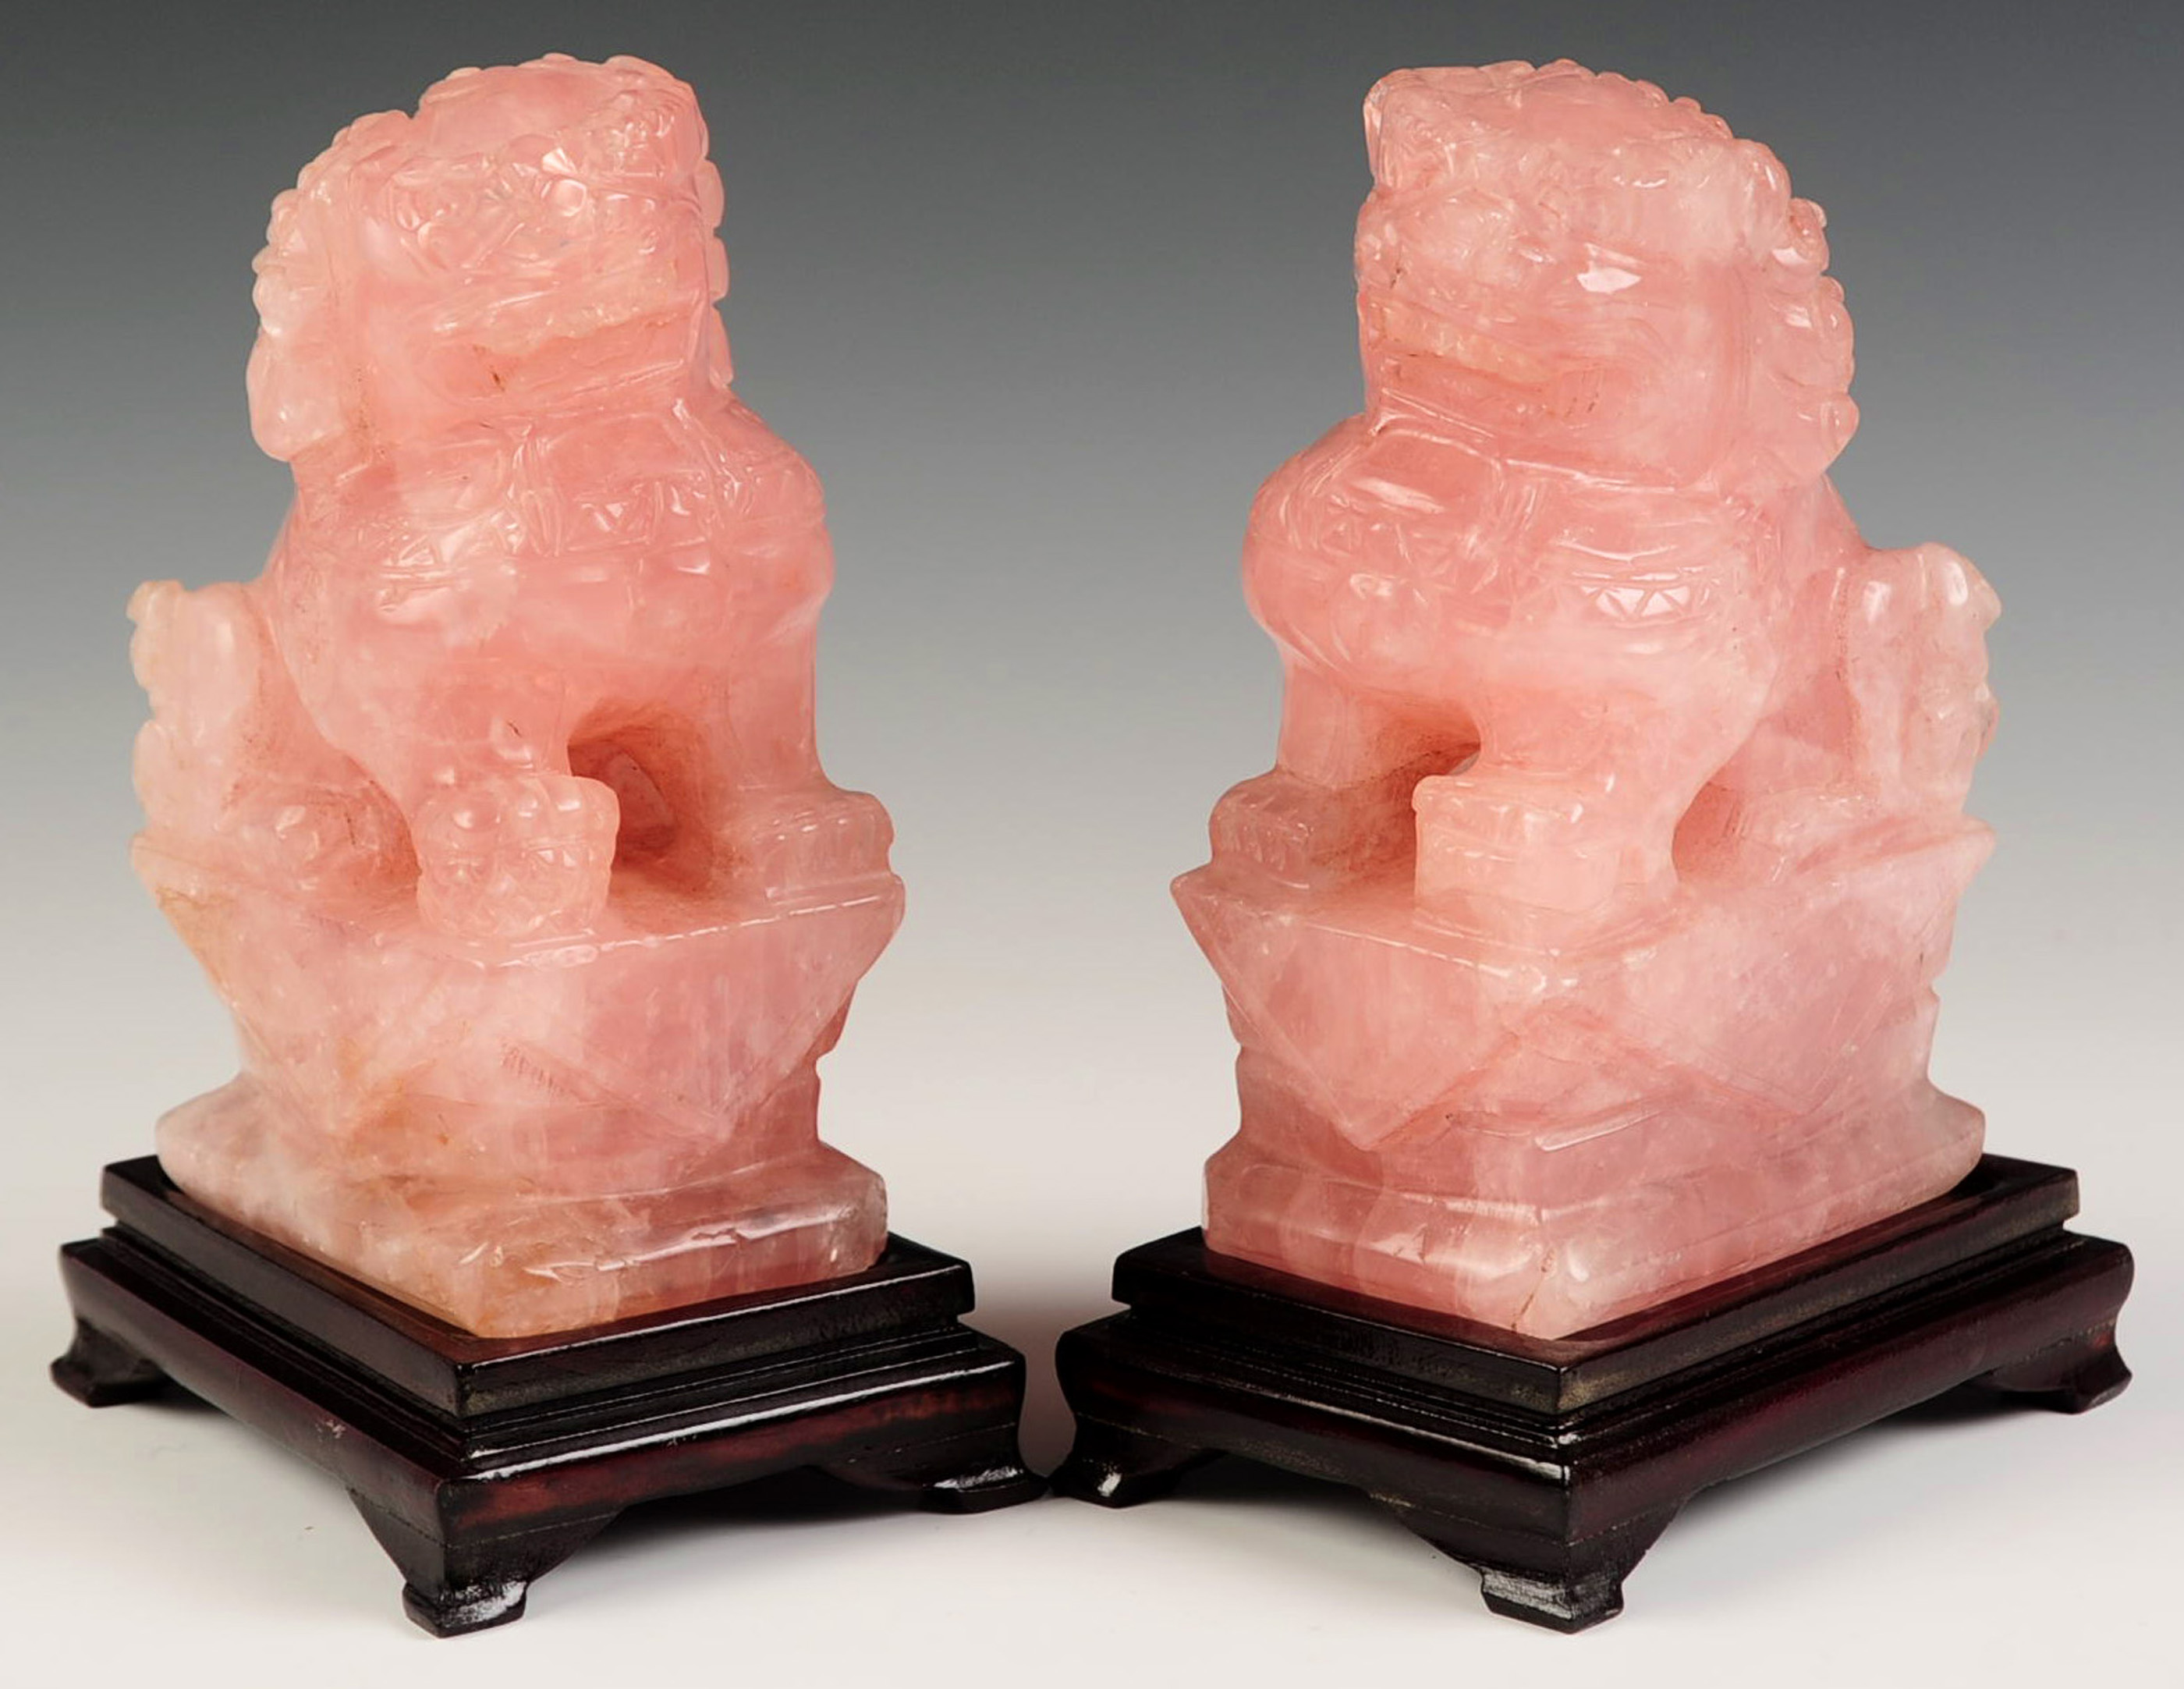 A PAIR OF CHINESE FU DOG ROSE QUARTZ CARVINGS